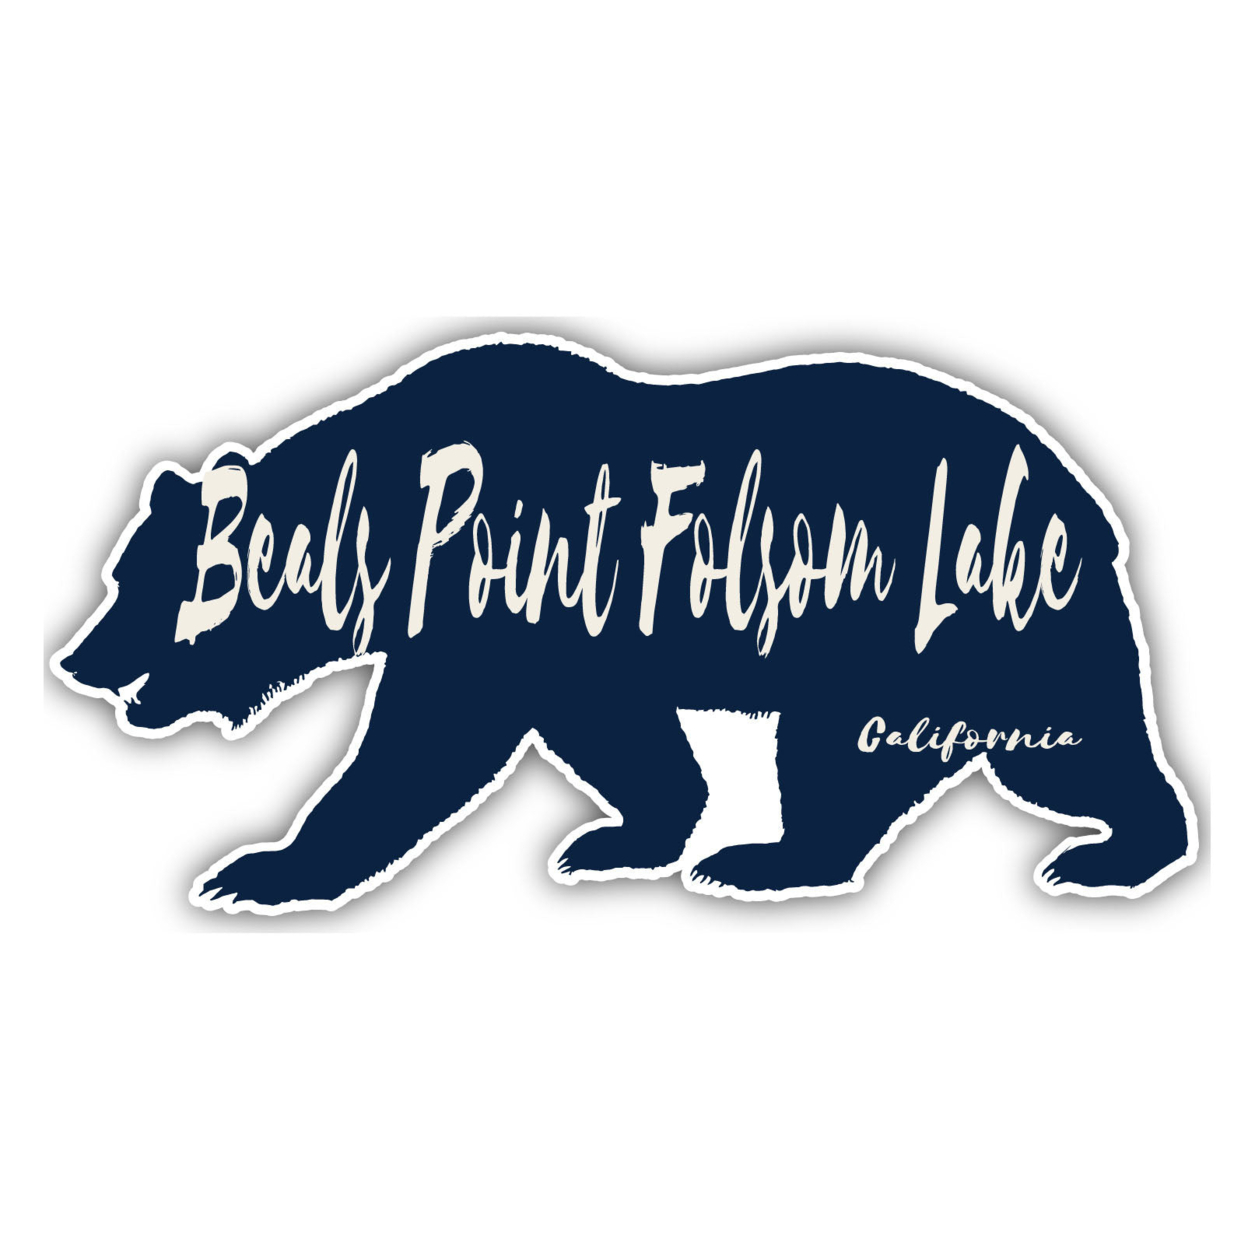 Beals Point Folsom Lake California Souvenir Decorative Stickers (Choose Theme And Size) - 4-Pack, 2-Inch, Bear